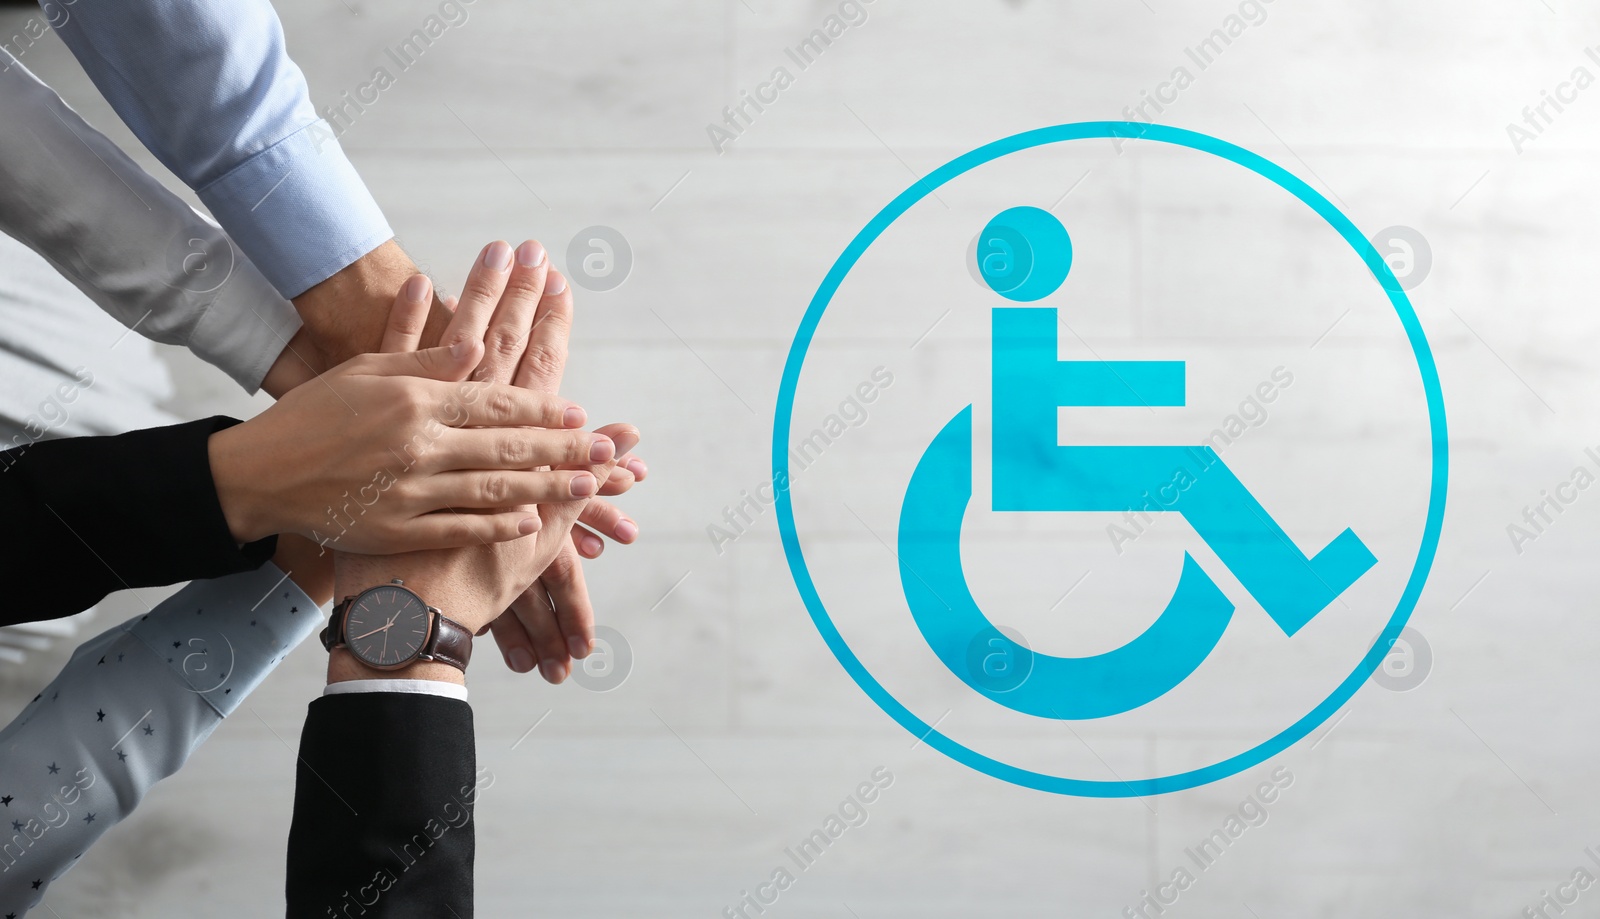 Image of Inclusive workplace culture, banner design. International symbol of access. People holding hands together, top view